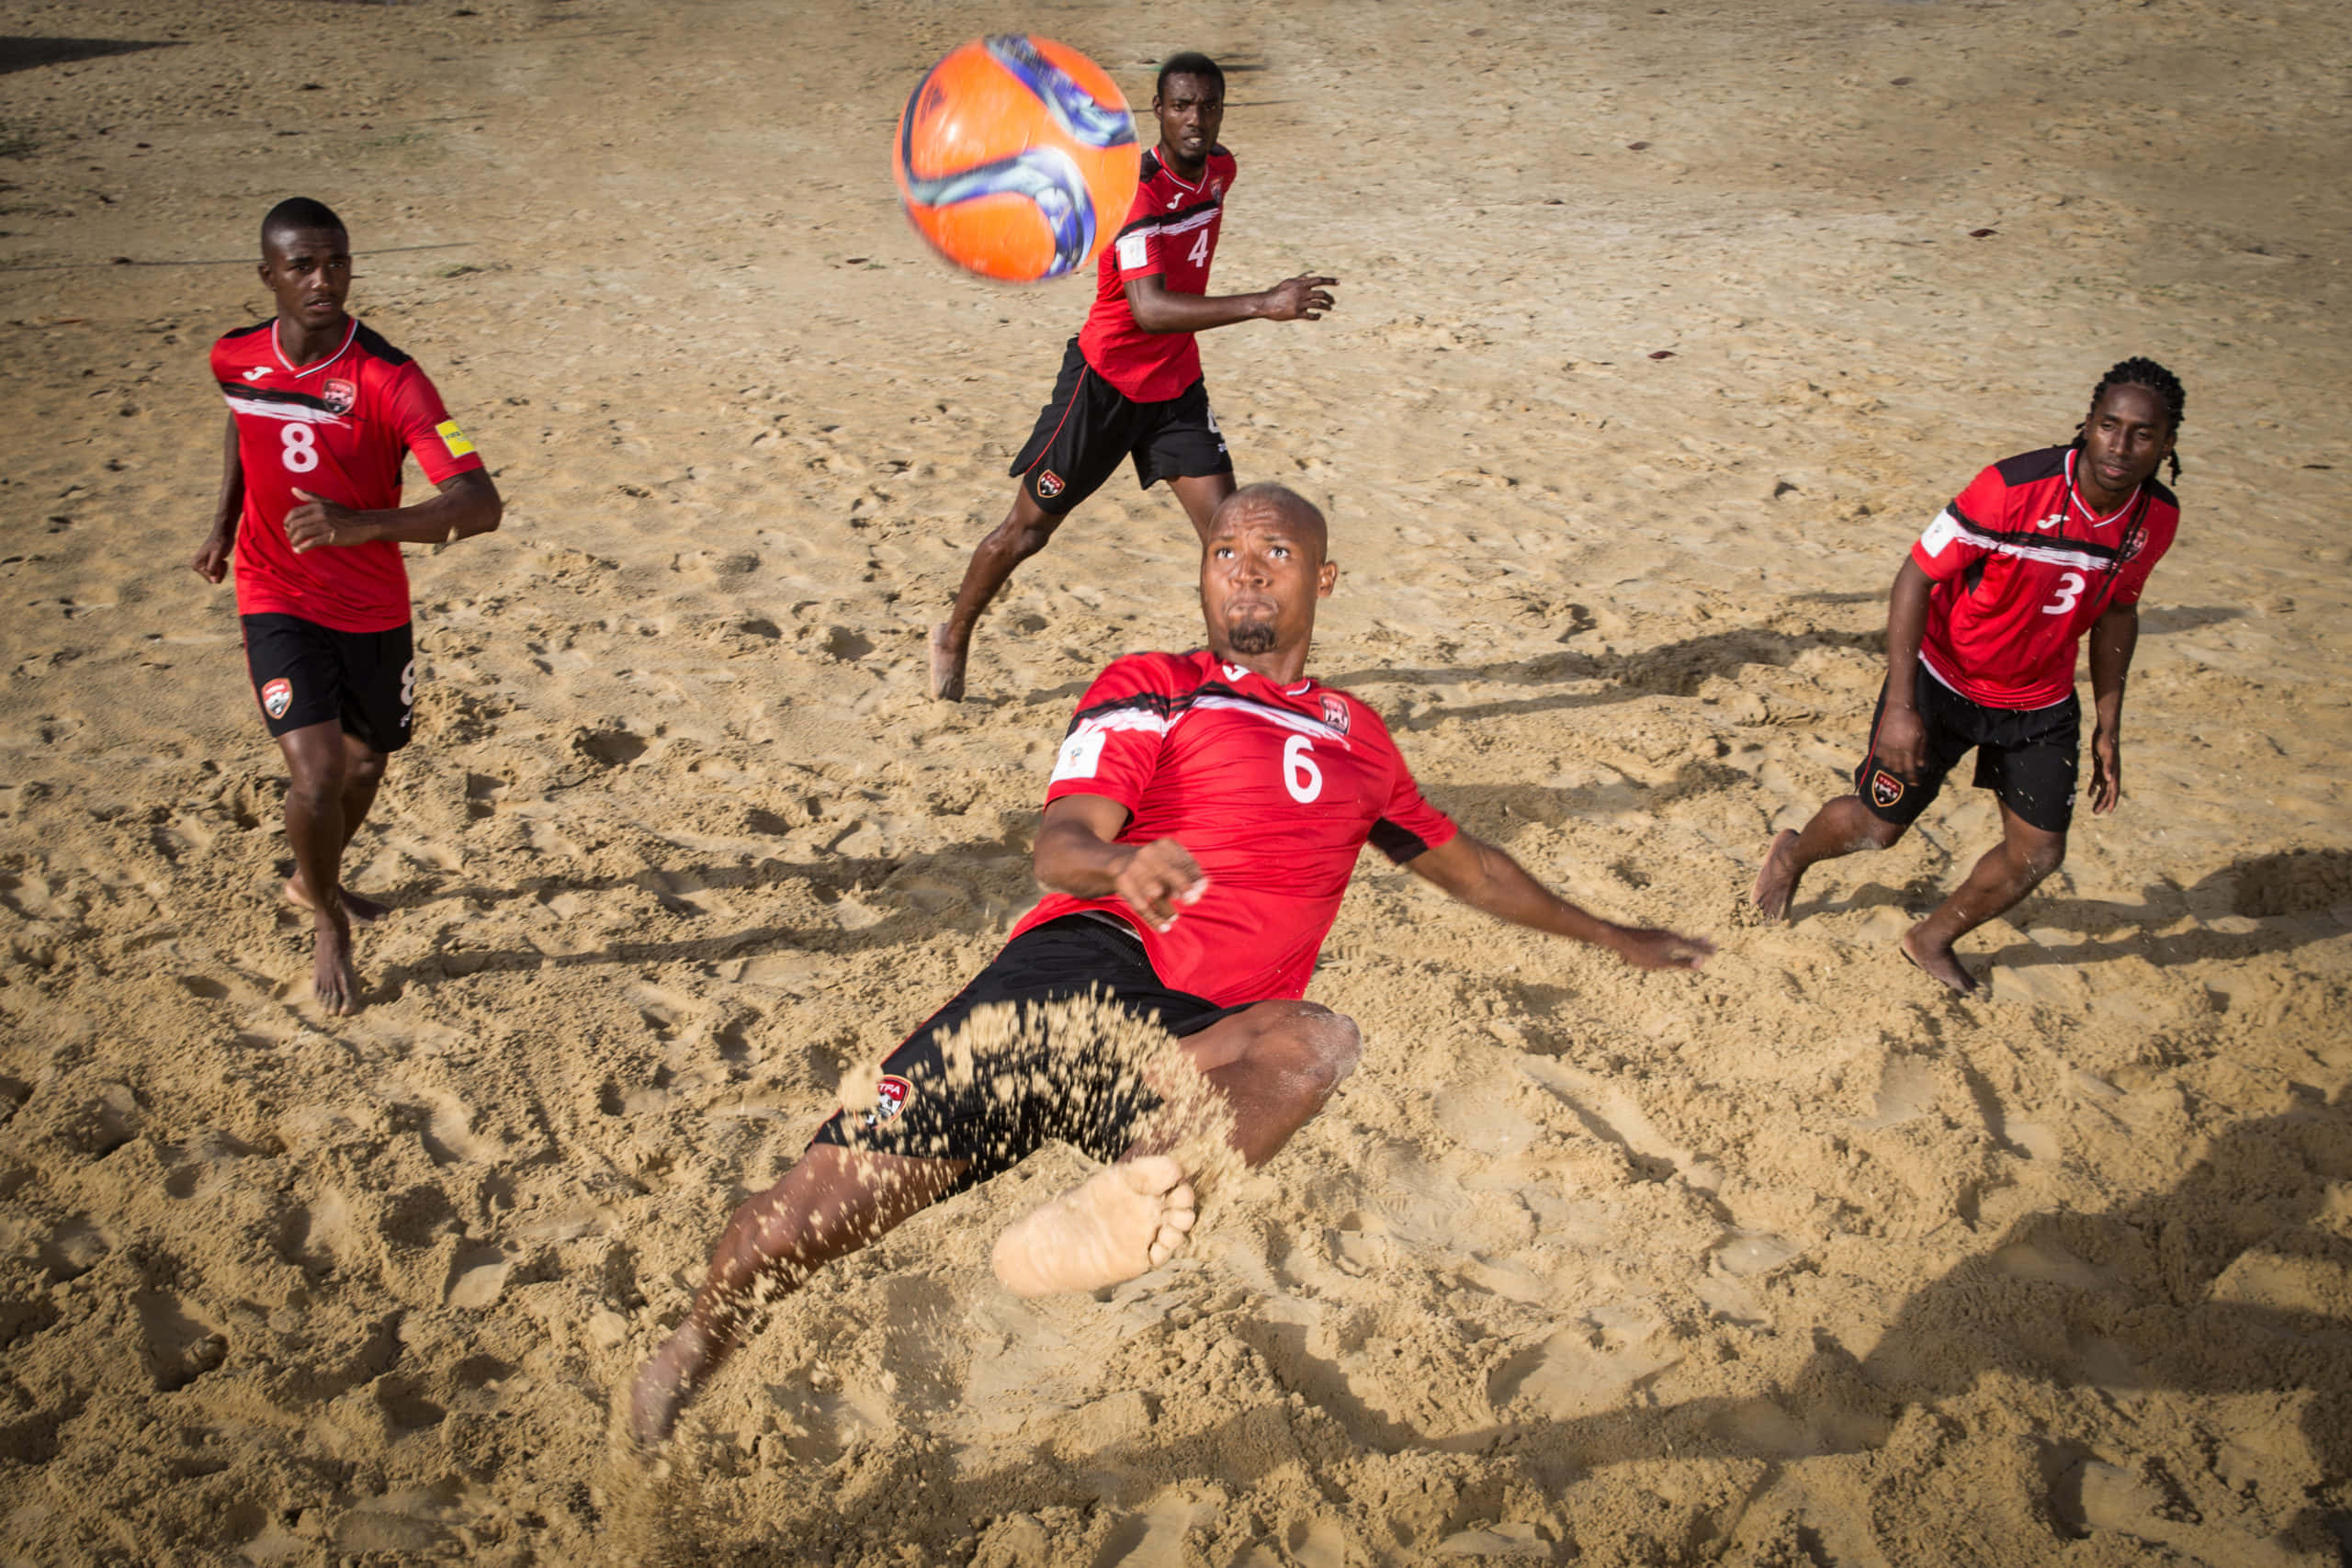 Thrilling Action At A Beach Soccer Match Wallpaper